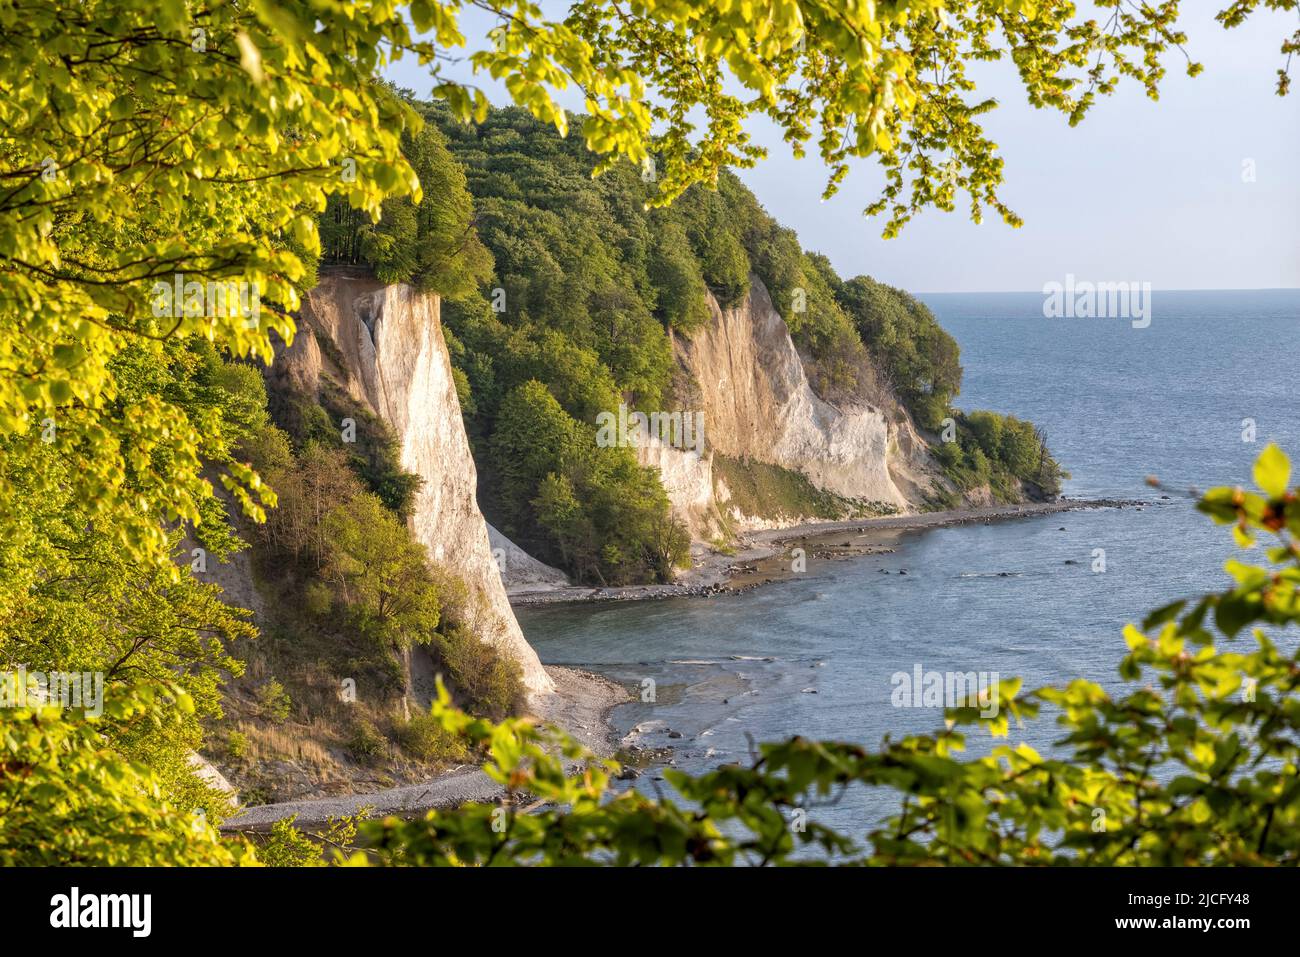 View from the high bank hiking trail in the Jasmund National Park to the chalk coast on the Kiel shore Stock Photo